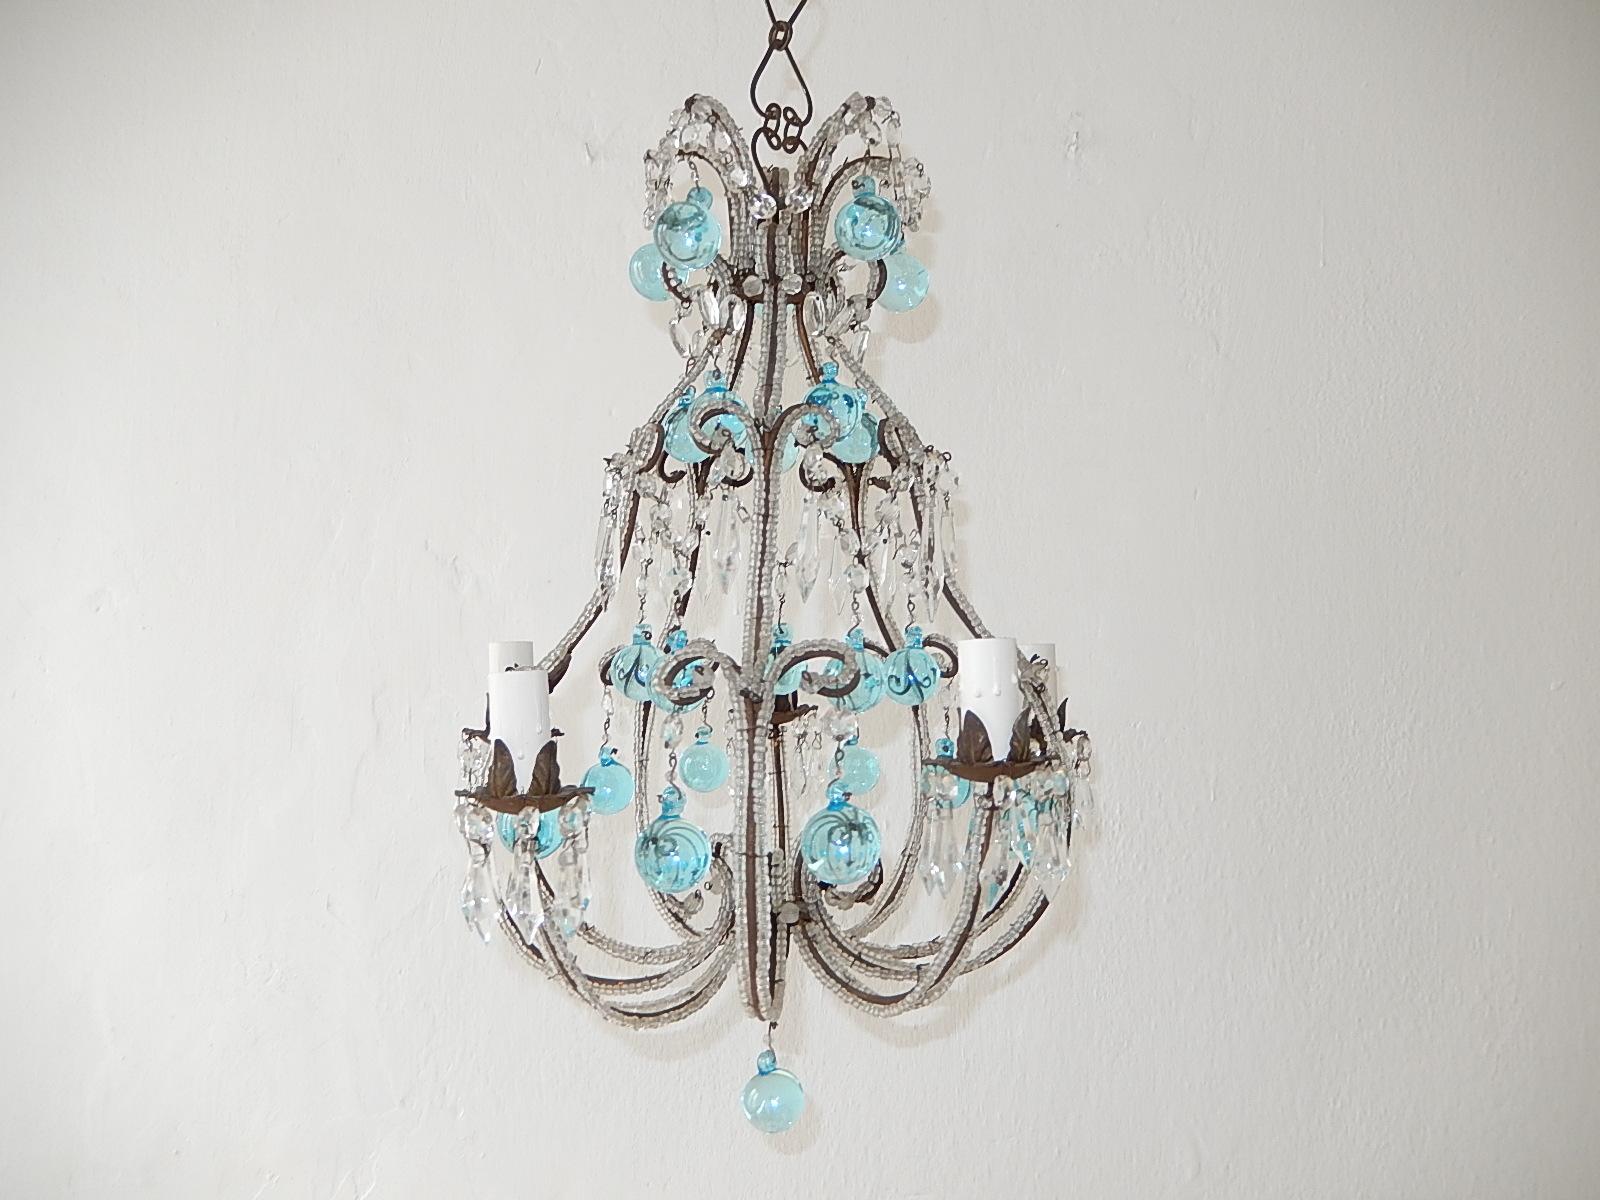 Housing 5 lights. Will be rewired with certified UL US sockets for the USA or certified sockets for other countries and ready to hang. Double beaded throughout. Adorning vintage hand tied crystal prisms and aqua blue Murano balls. Adding another 24